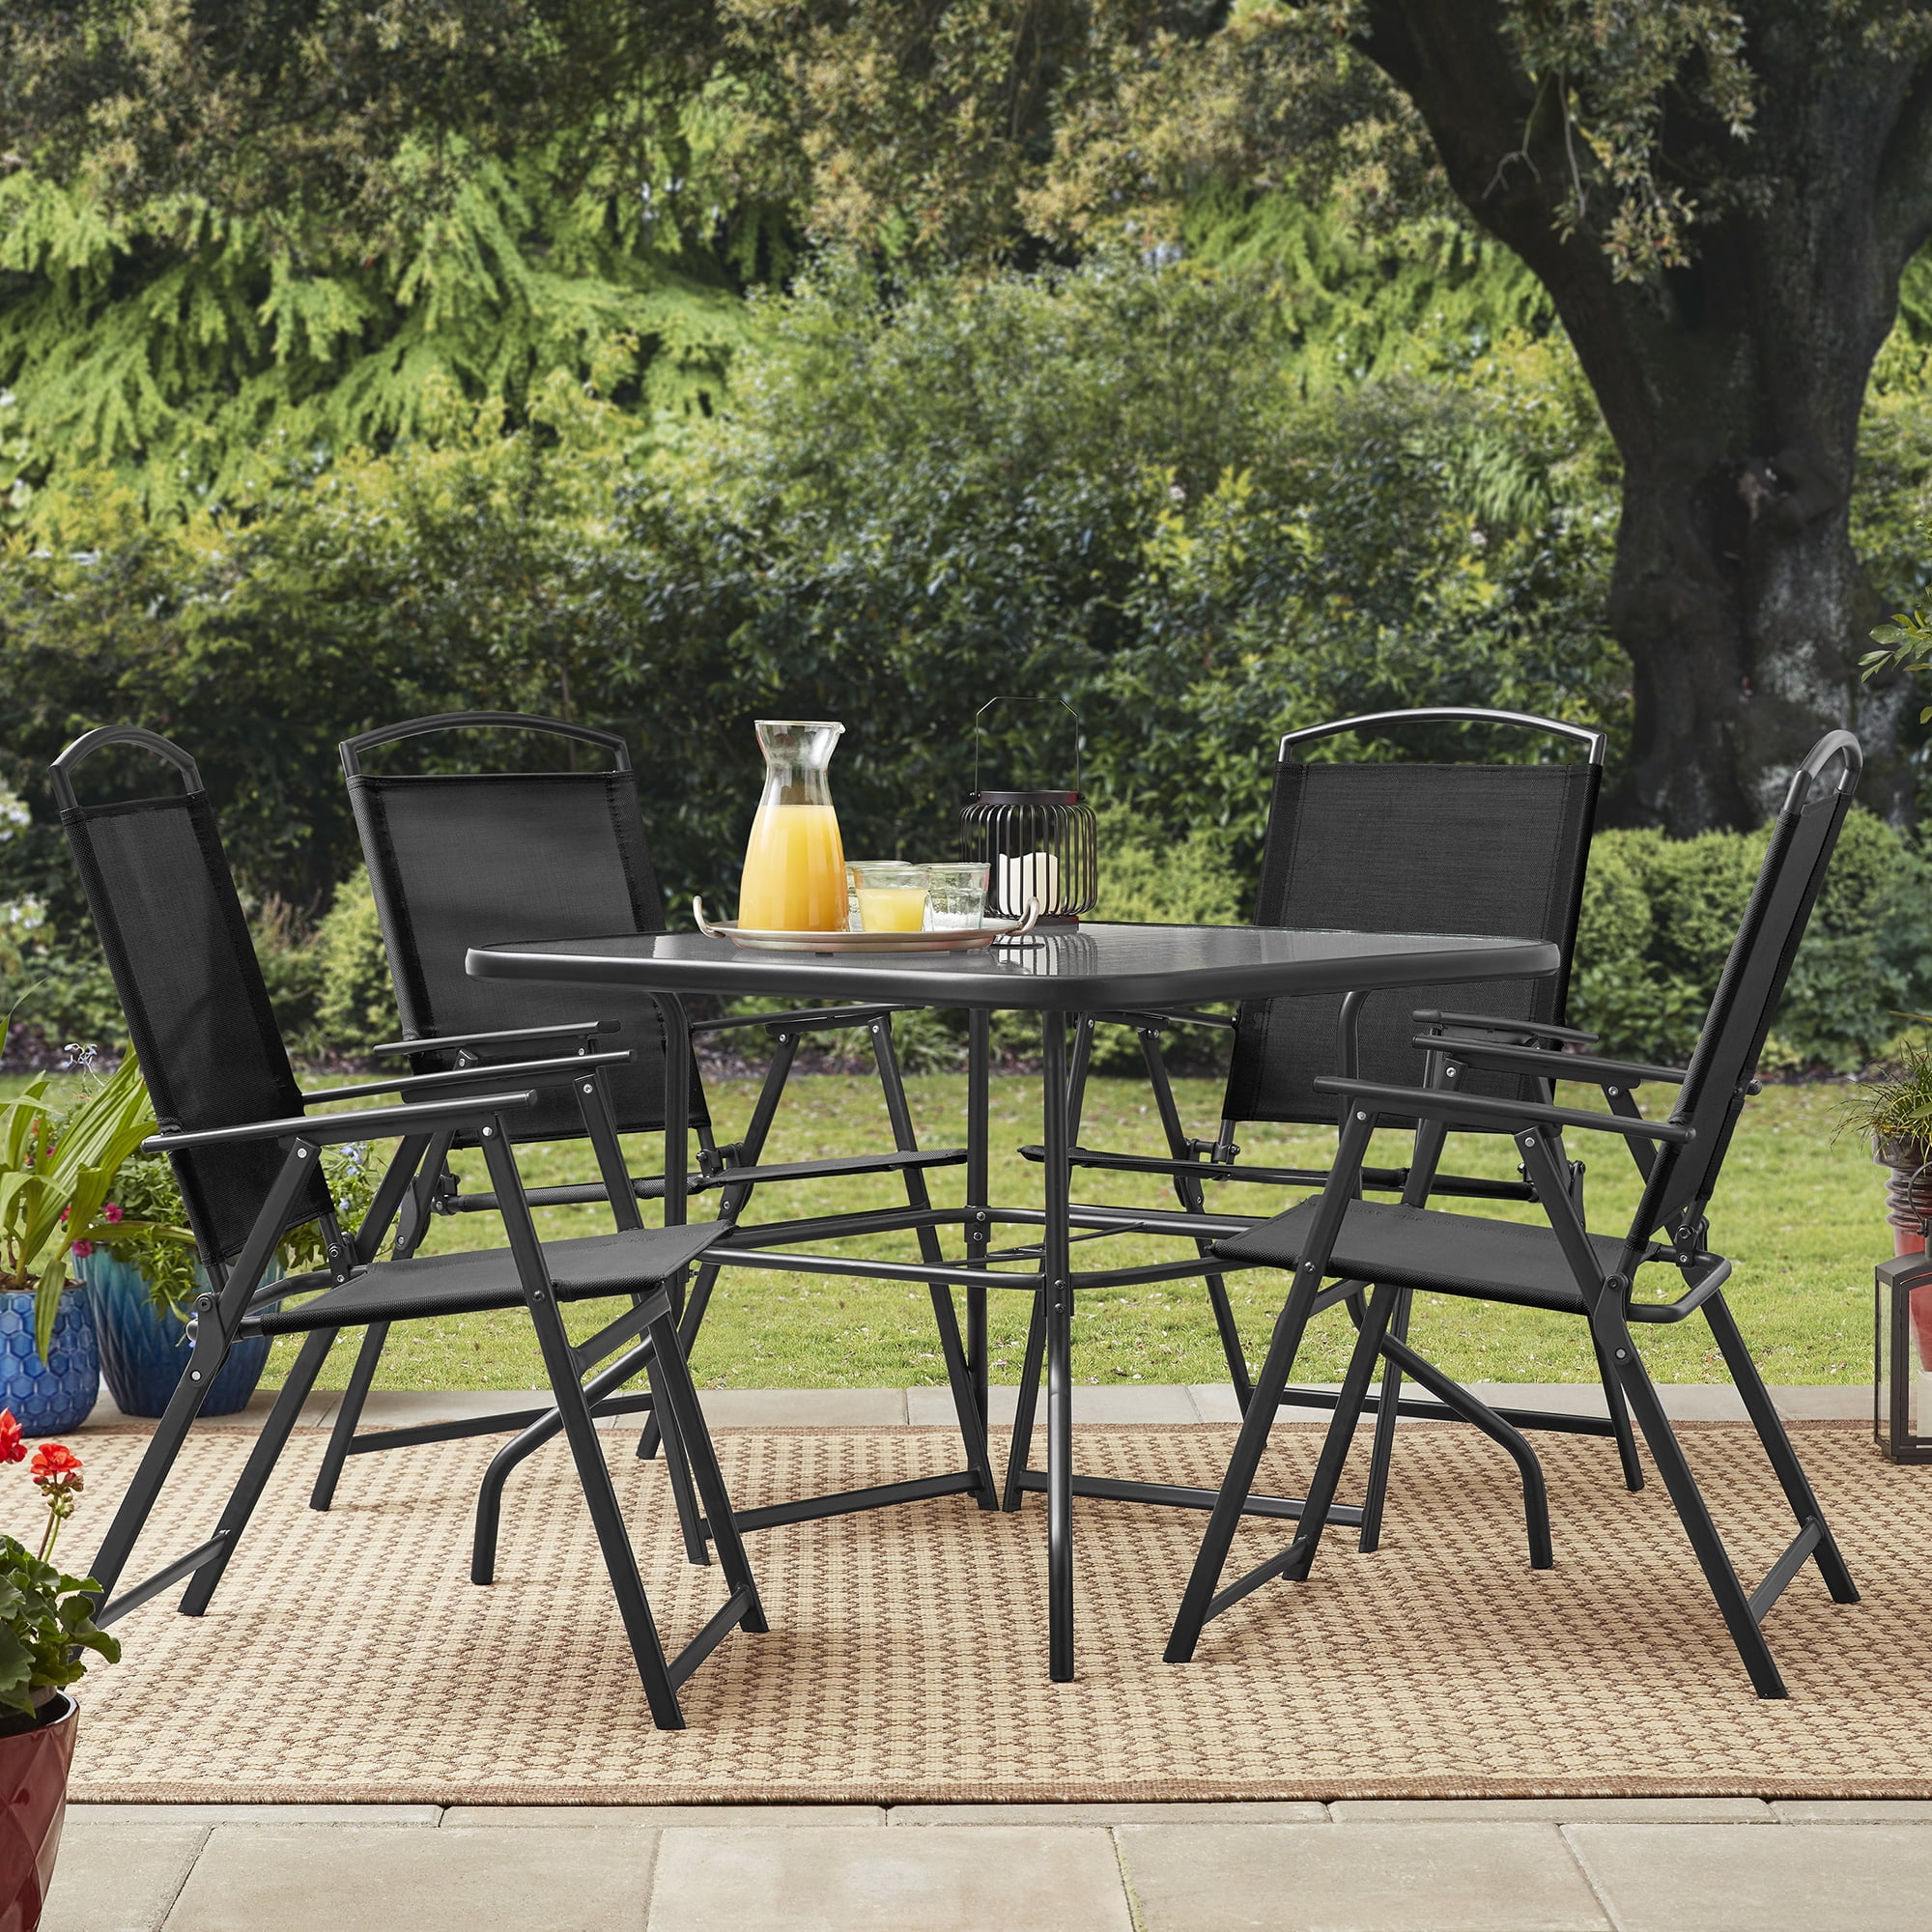 Mainstays Albany Lane Outdoor Patio 5 Piece Dining Set, Black Frame and Sling, 4 Person